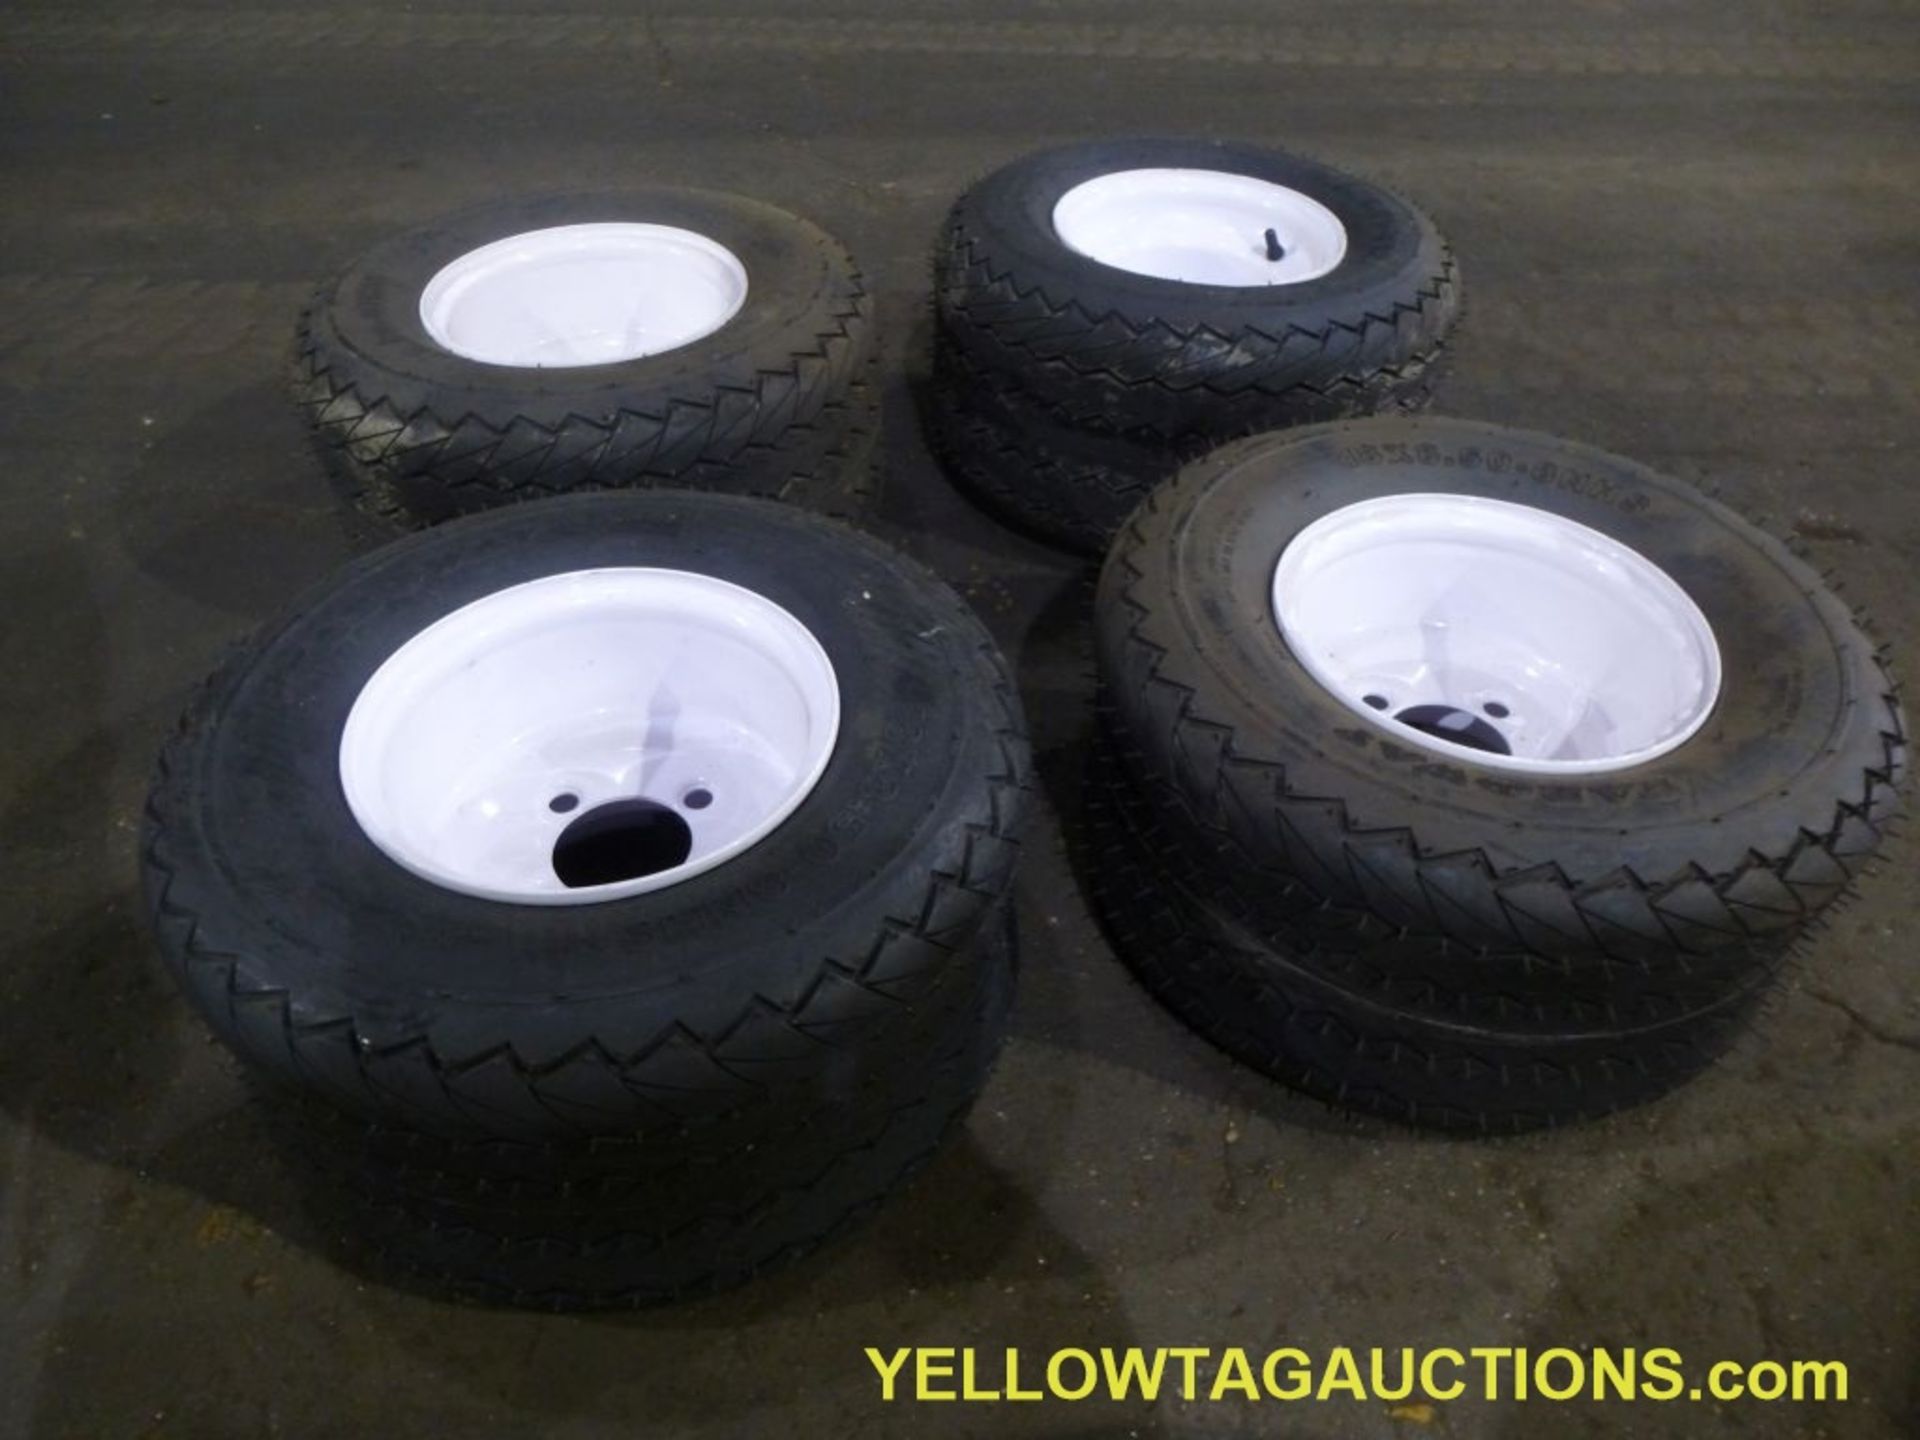 Lot of (12) FarWay 6-Ply Nylon Tires & Wheels|18 X 8.50 - 8NHS|Tag: 417 - Image 2 of 8